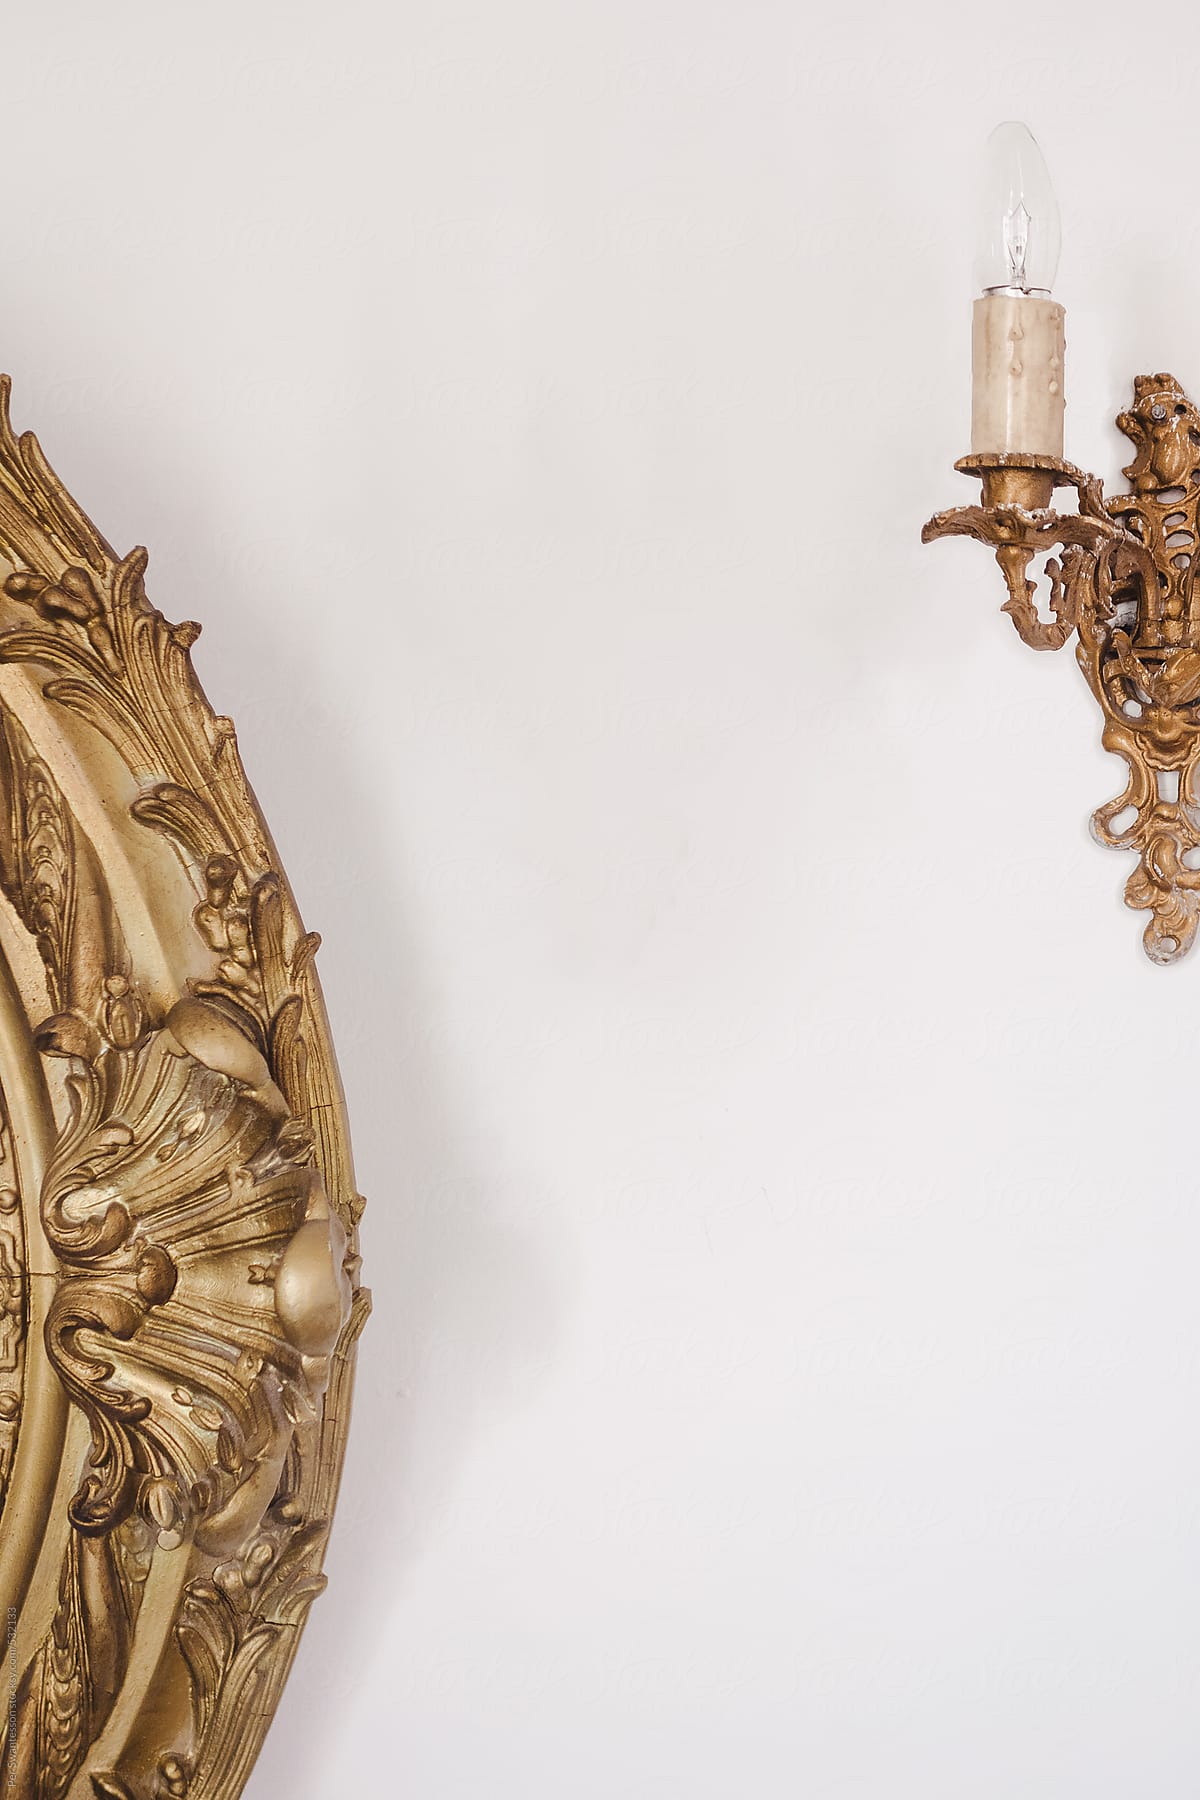 Antique golden sconce and decor